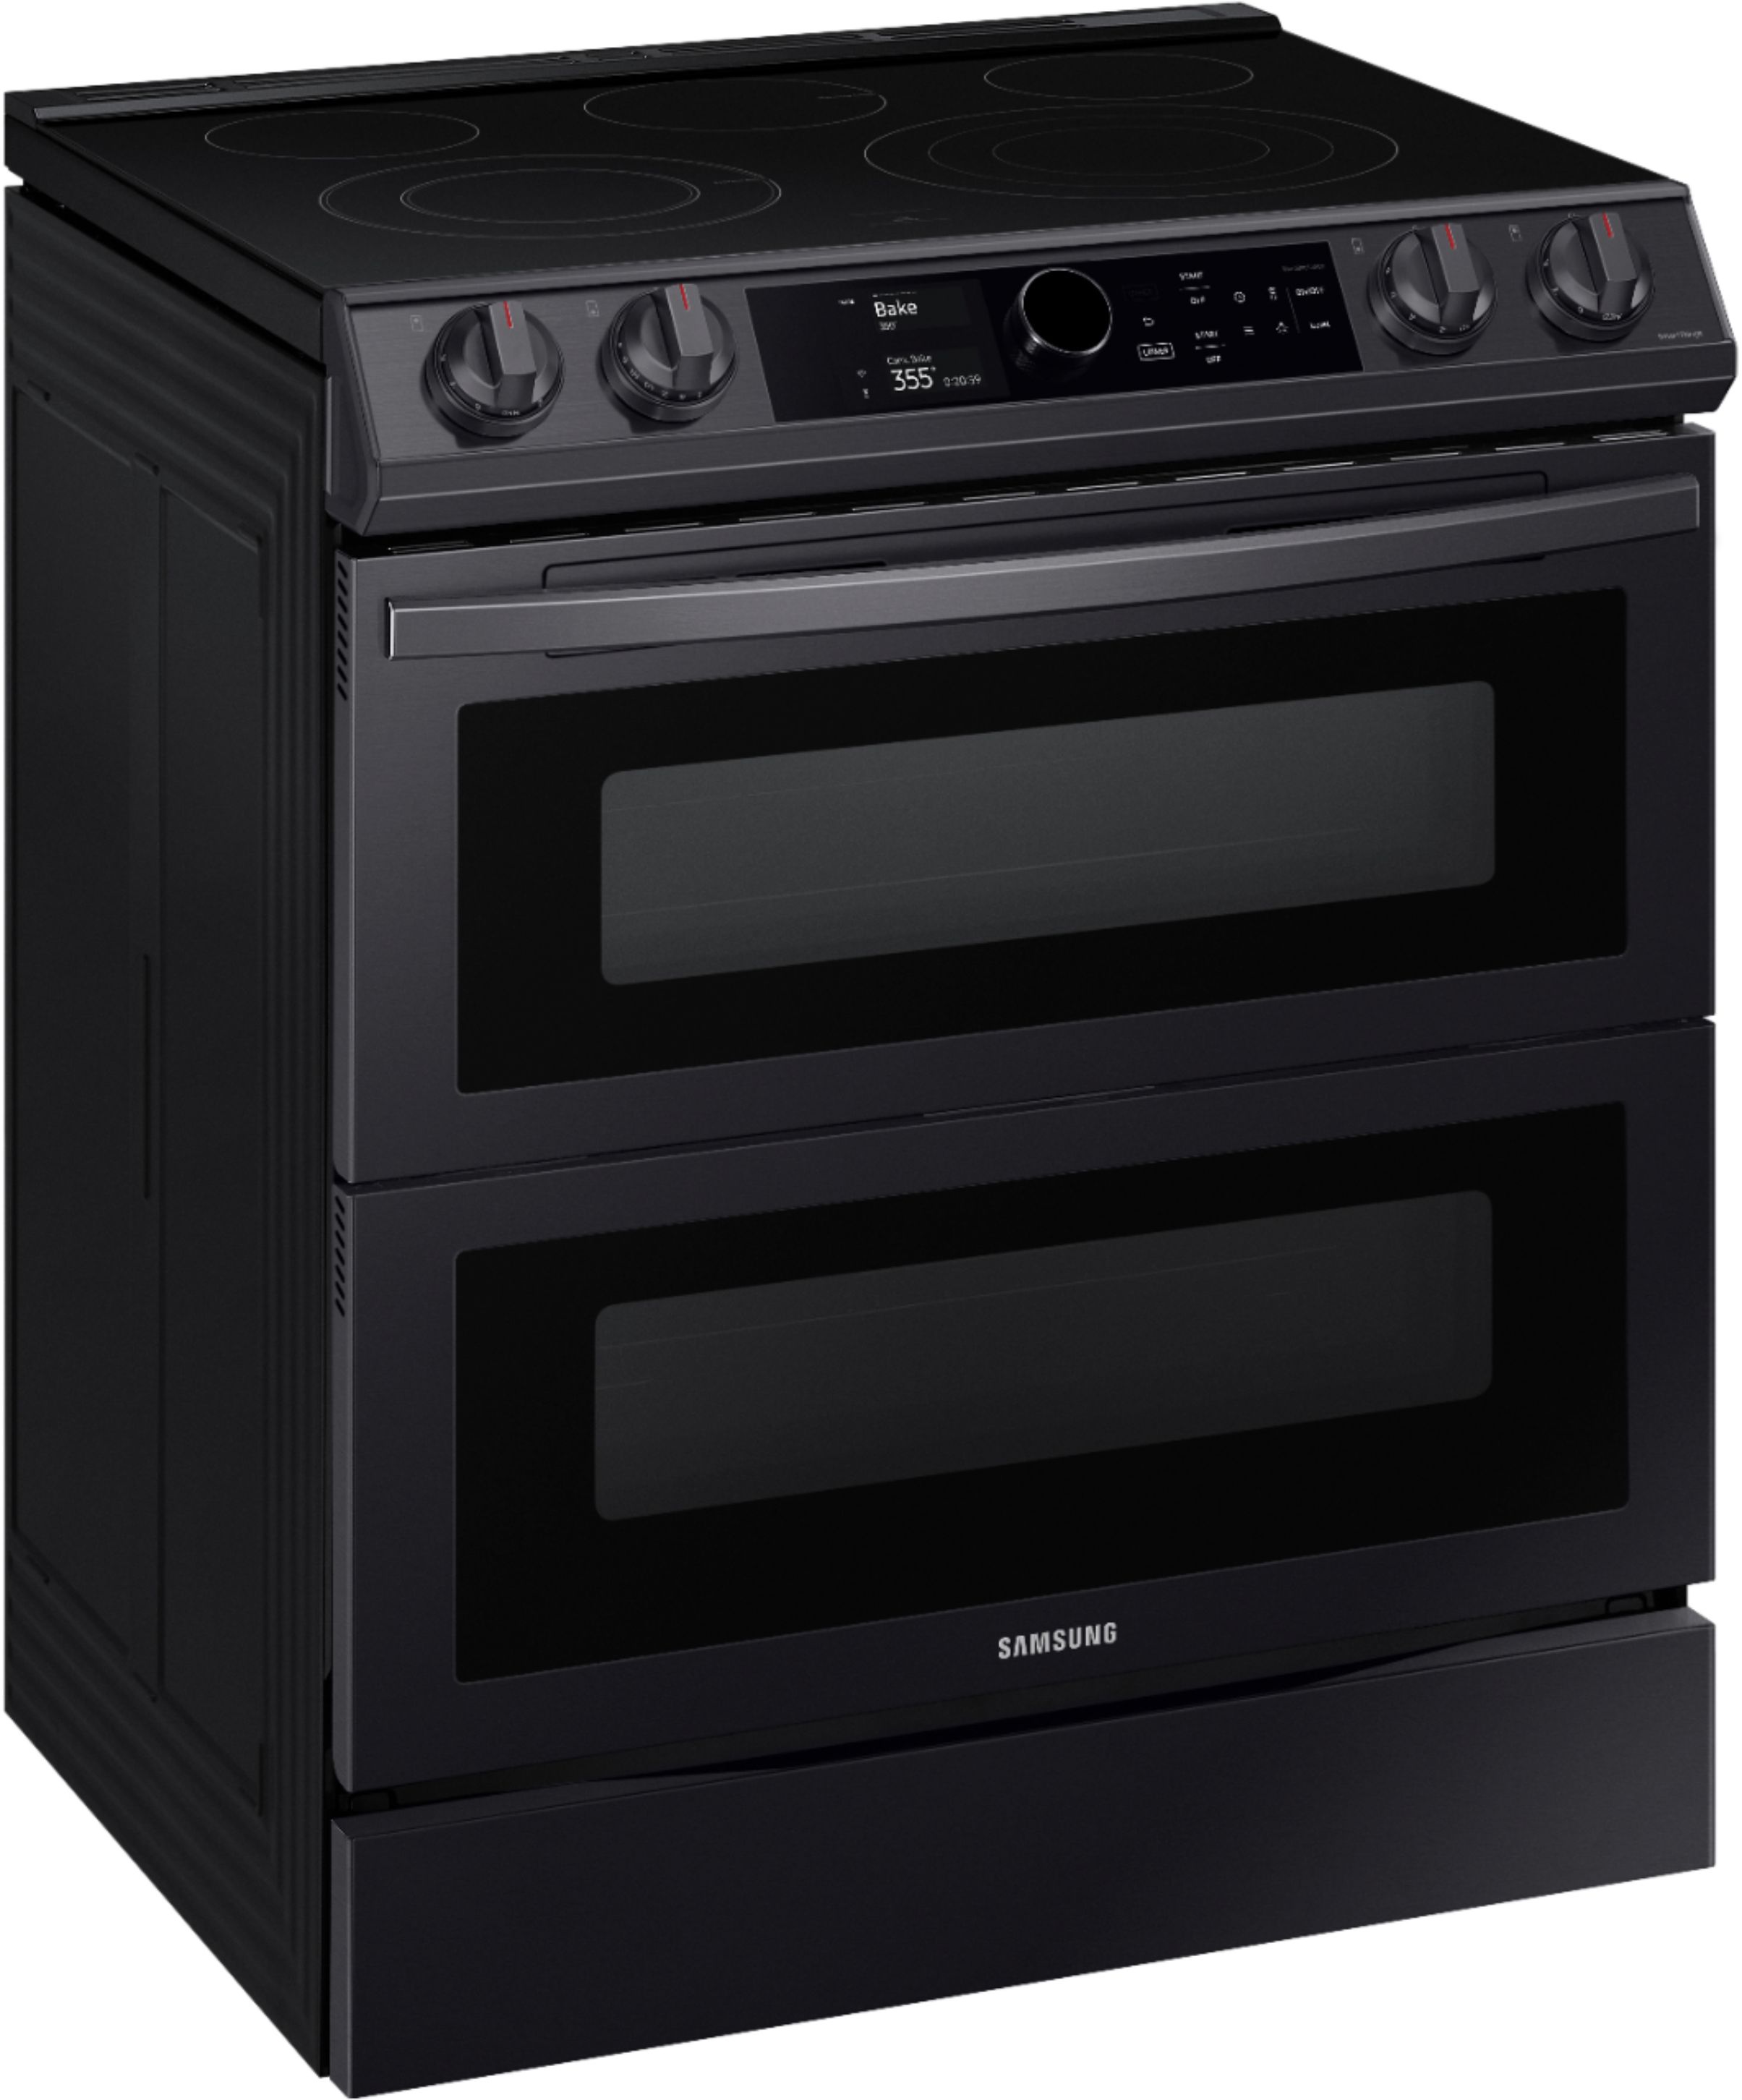 Angle View: Samsung - 6.3 cu. ft. Flex Duo Front Control Slide-in Electric Range with Smart Dial, Air Fry & Wi-Fi - Black stainless steel